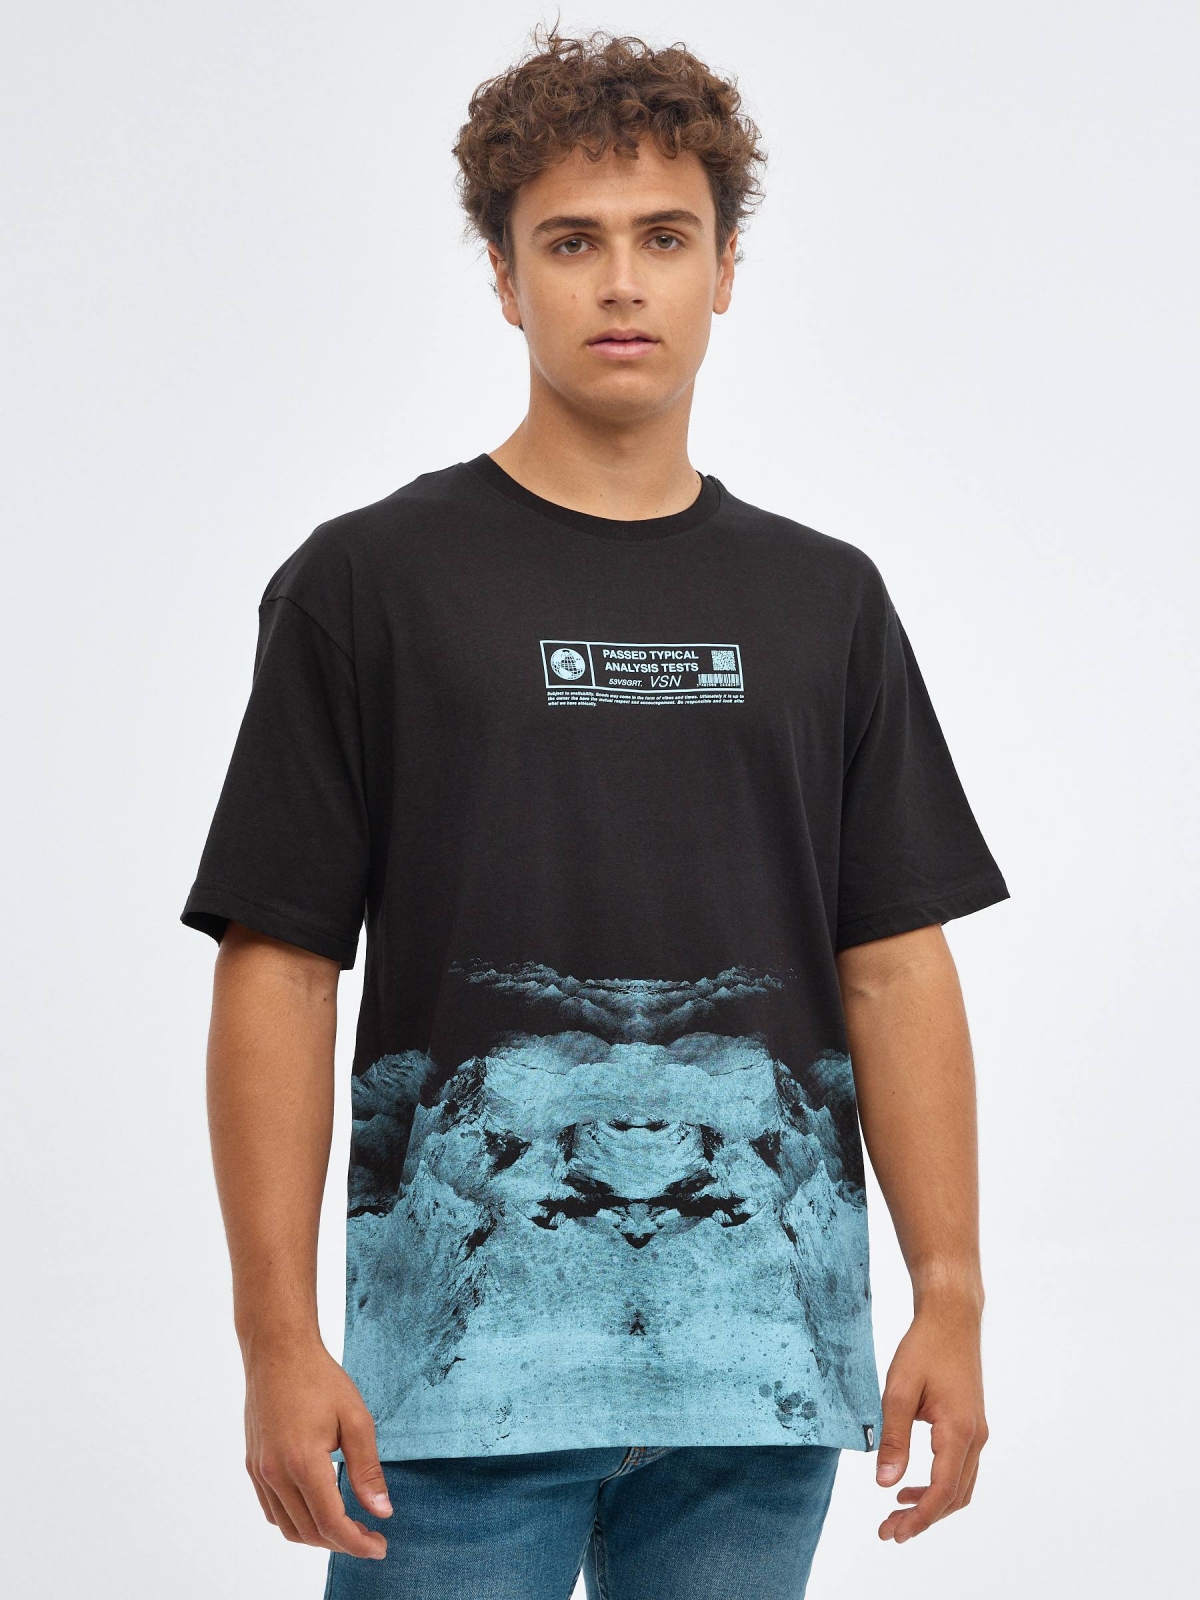 Oversized T-shirt code black middle front view